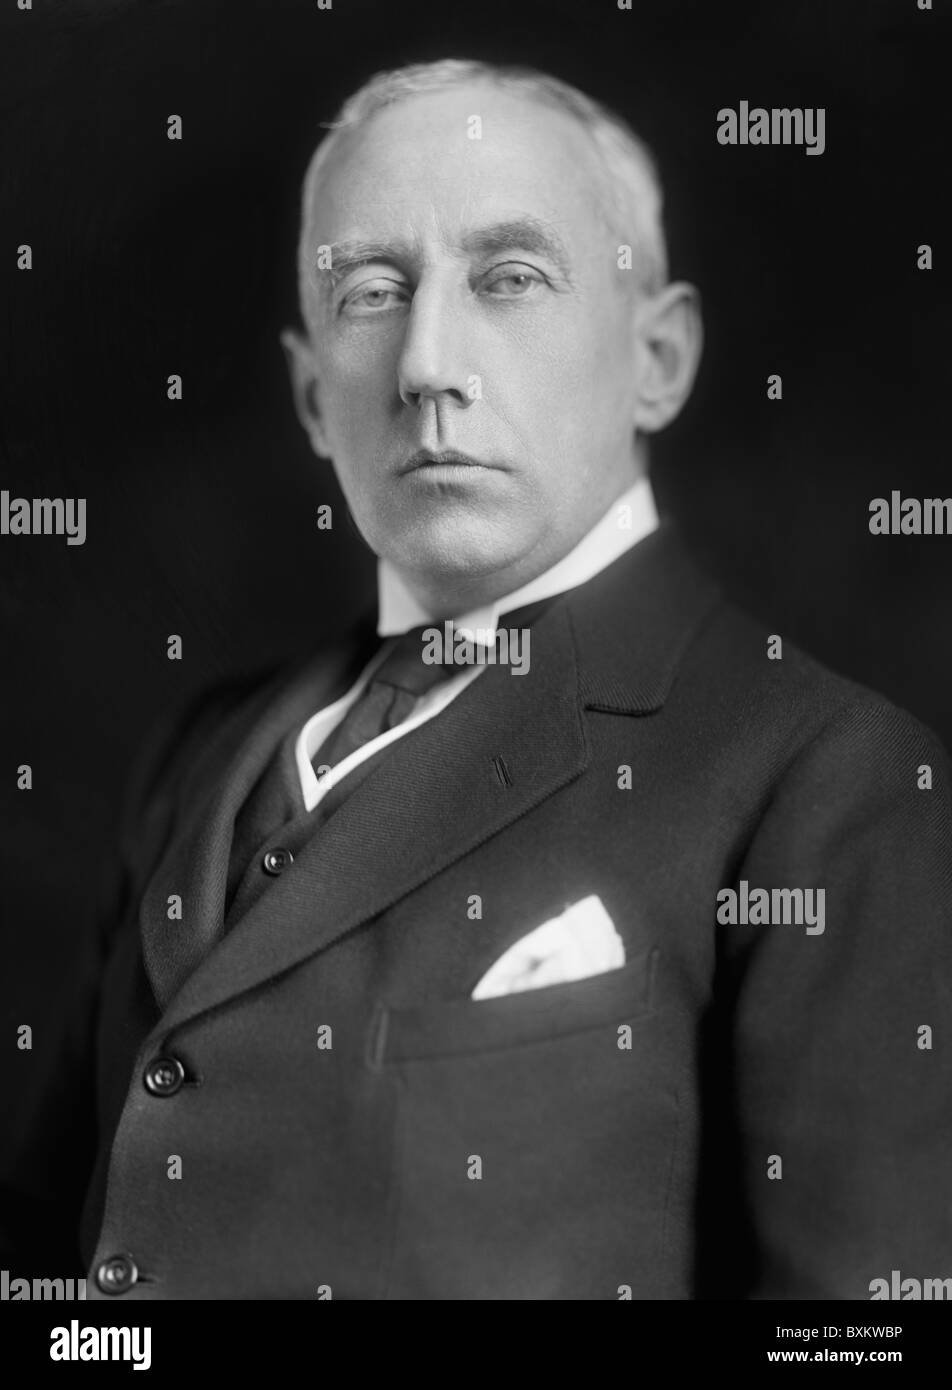 Norwegian polar explorer Roald Amundsen (1872 - 1928) - the first person to reach the geographic South Pole in December 1911. Stock Photo